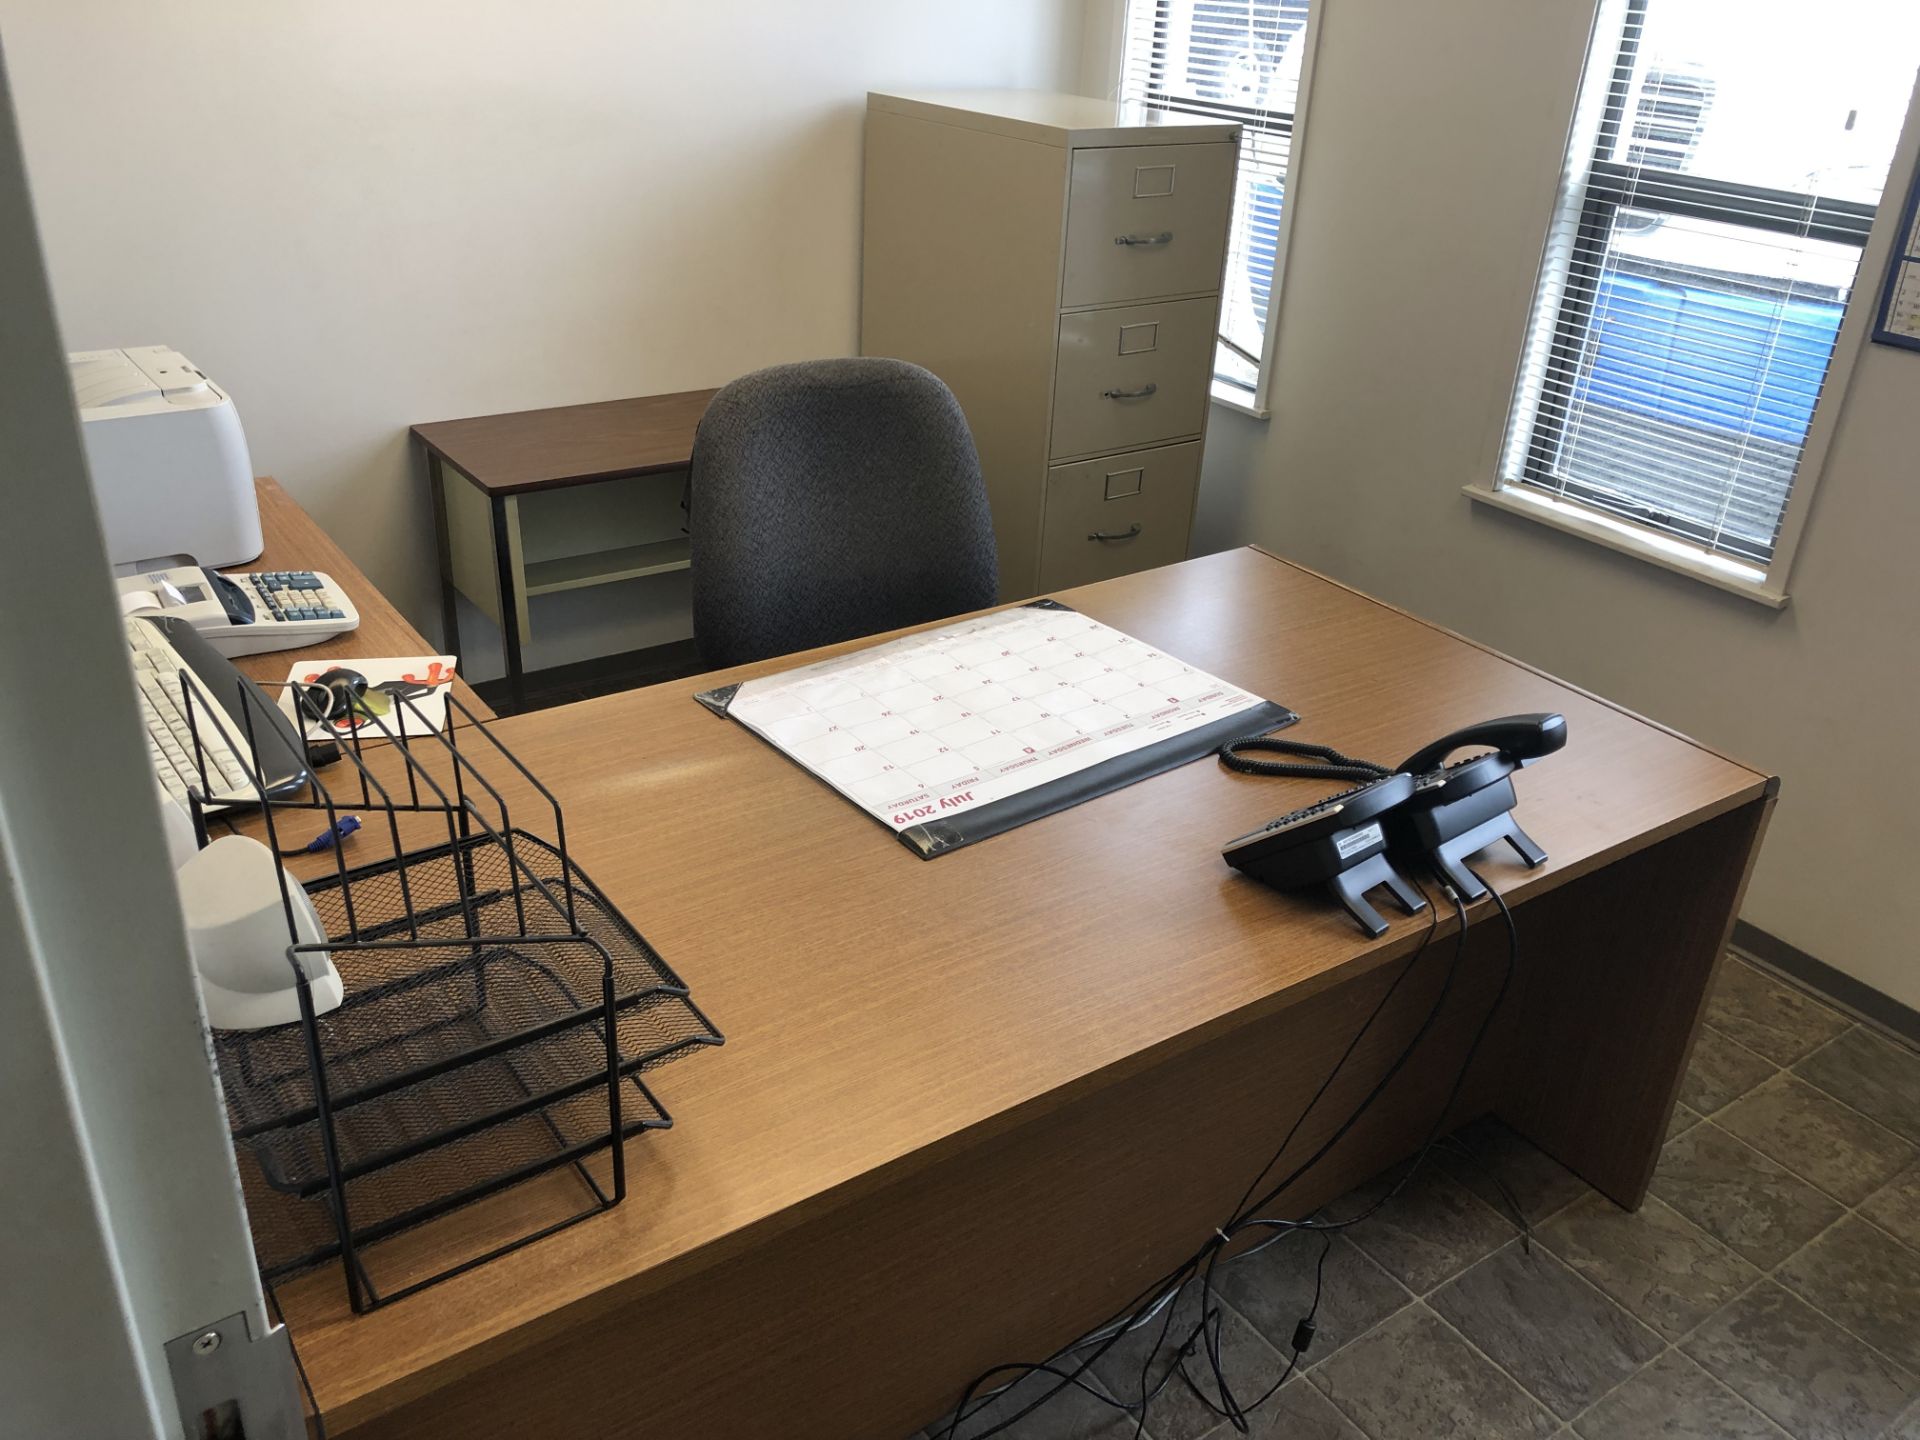 FURNITURE CONTENTS OF OFFICE INCLUDING L-SHAPED DESK, 4 DRAWER FILE CABINET, ROLLING METAL STAND, - Image 2 of 3